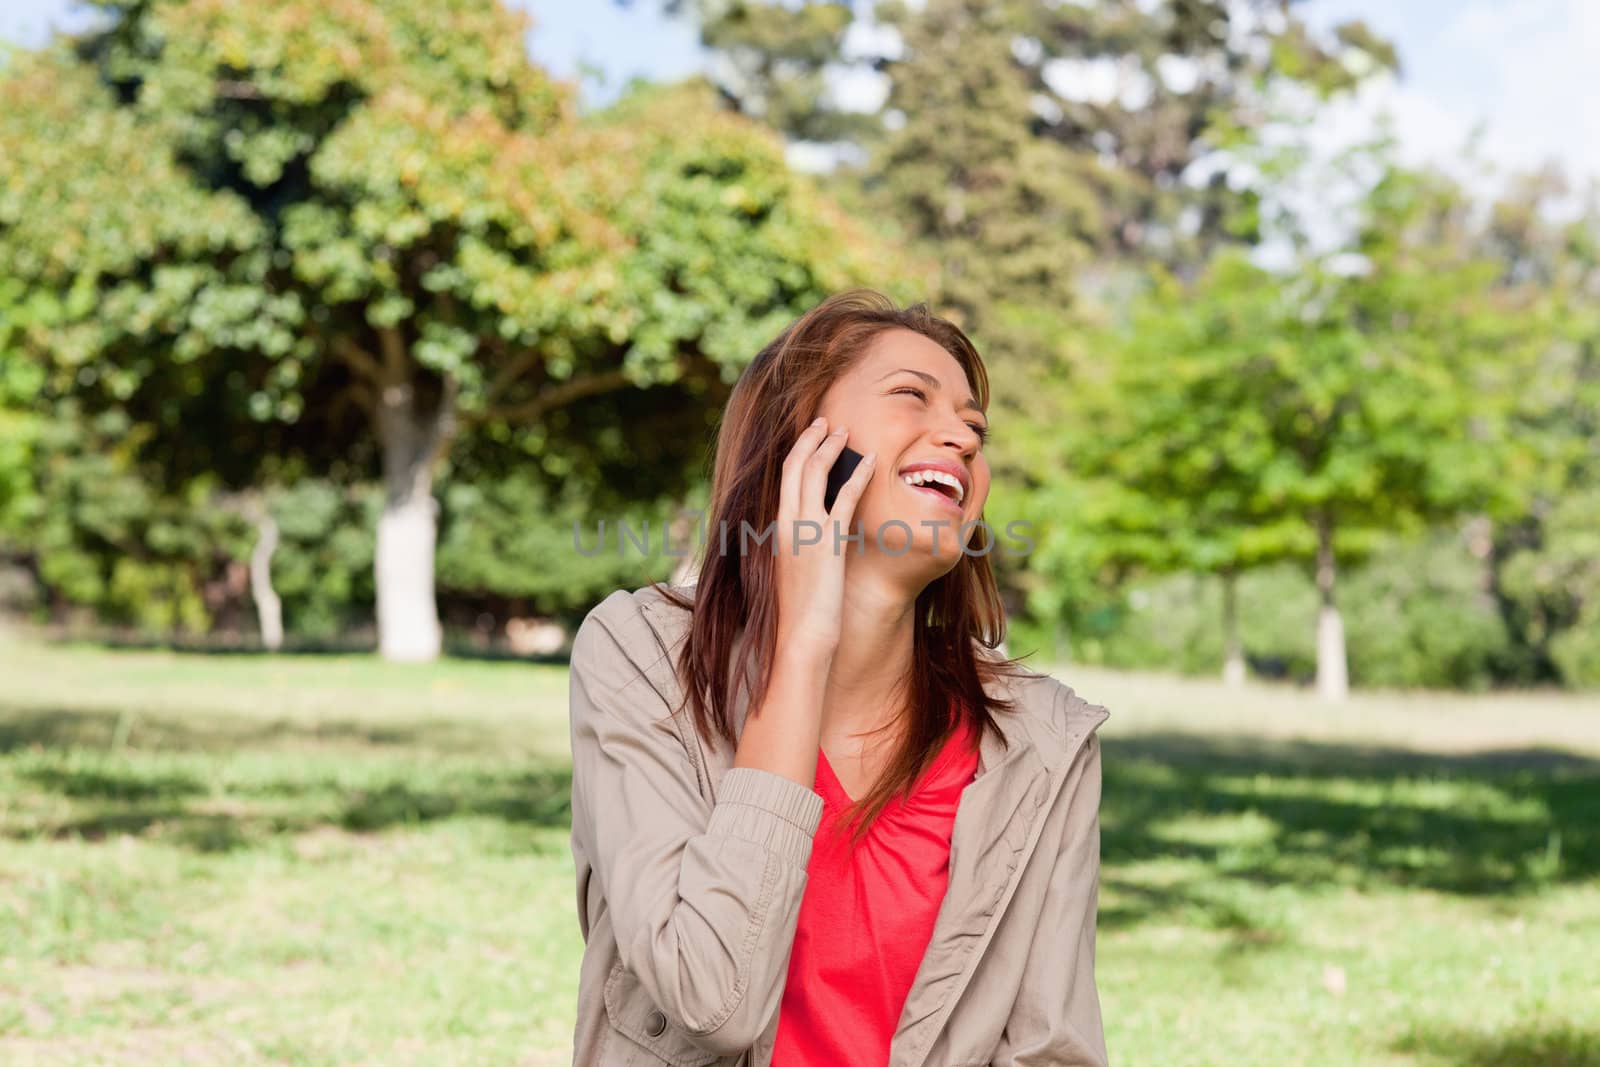 Woman laughing joyfully on a phone while standing in a sunny gra by Wavebreakmedia